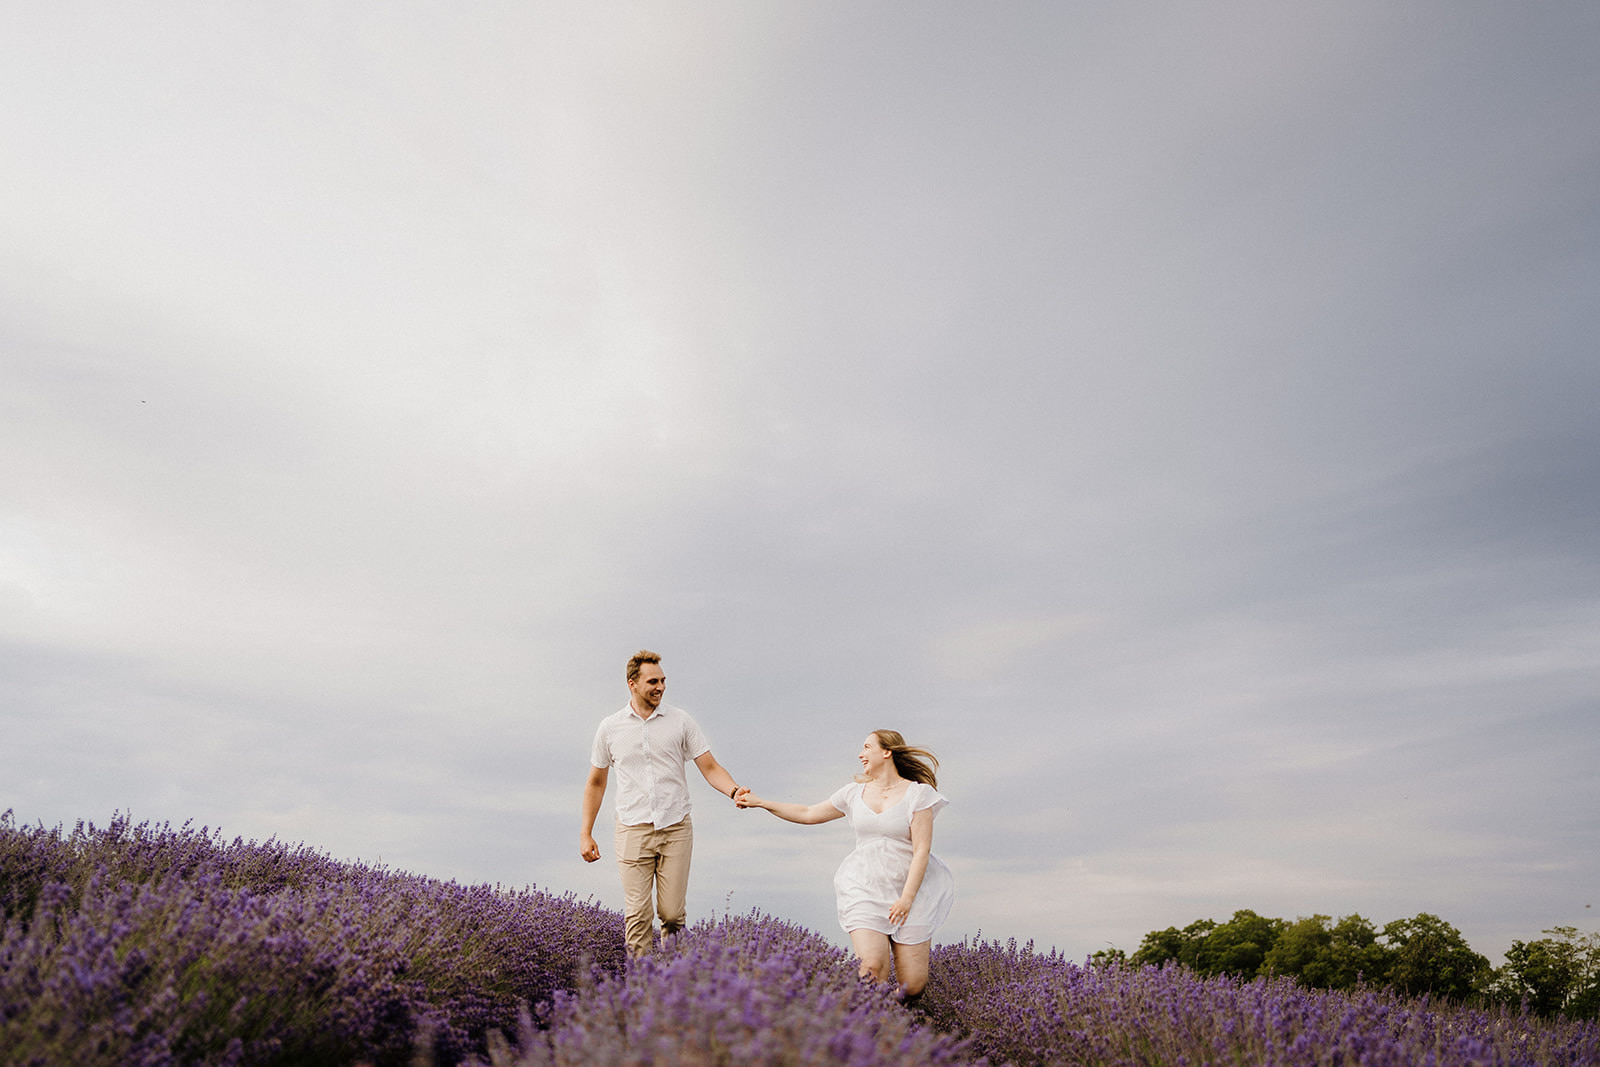 Man and woman holding hands walking down the field of lavender.